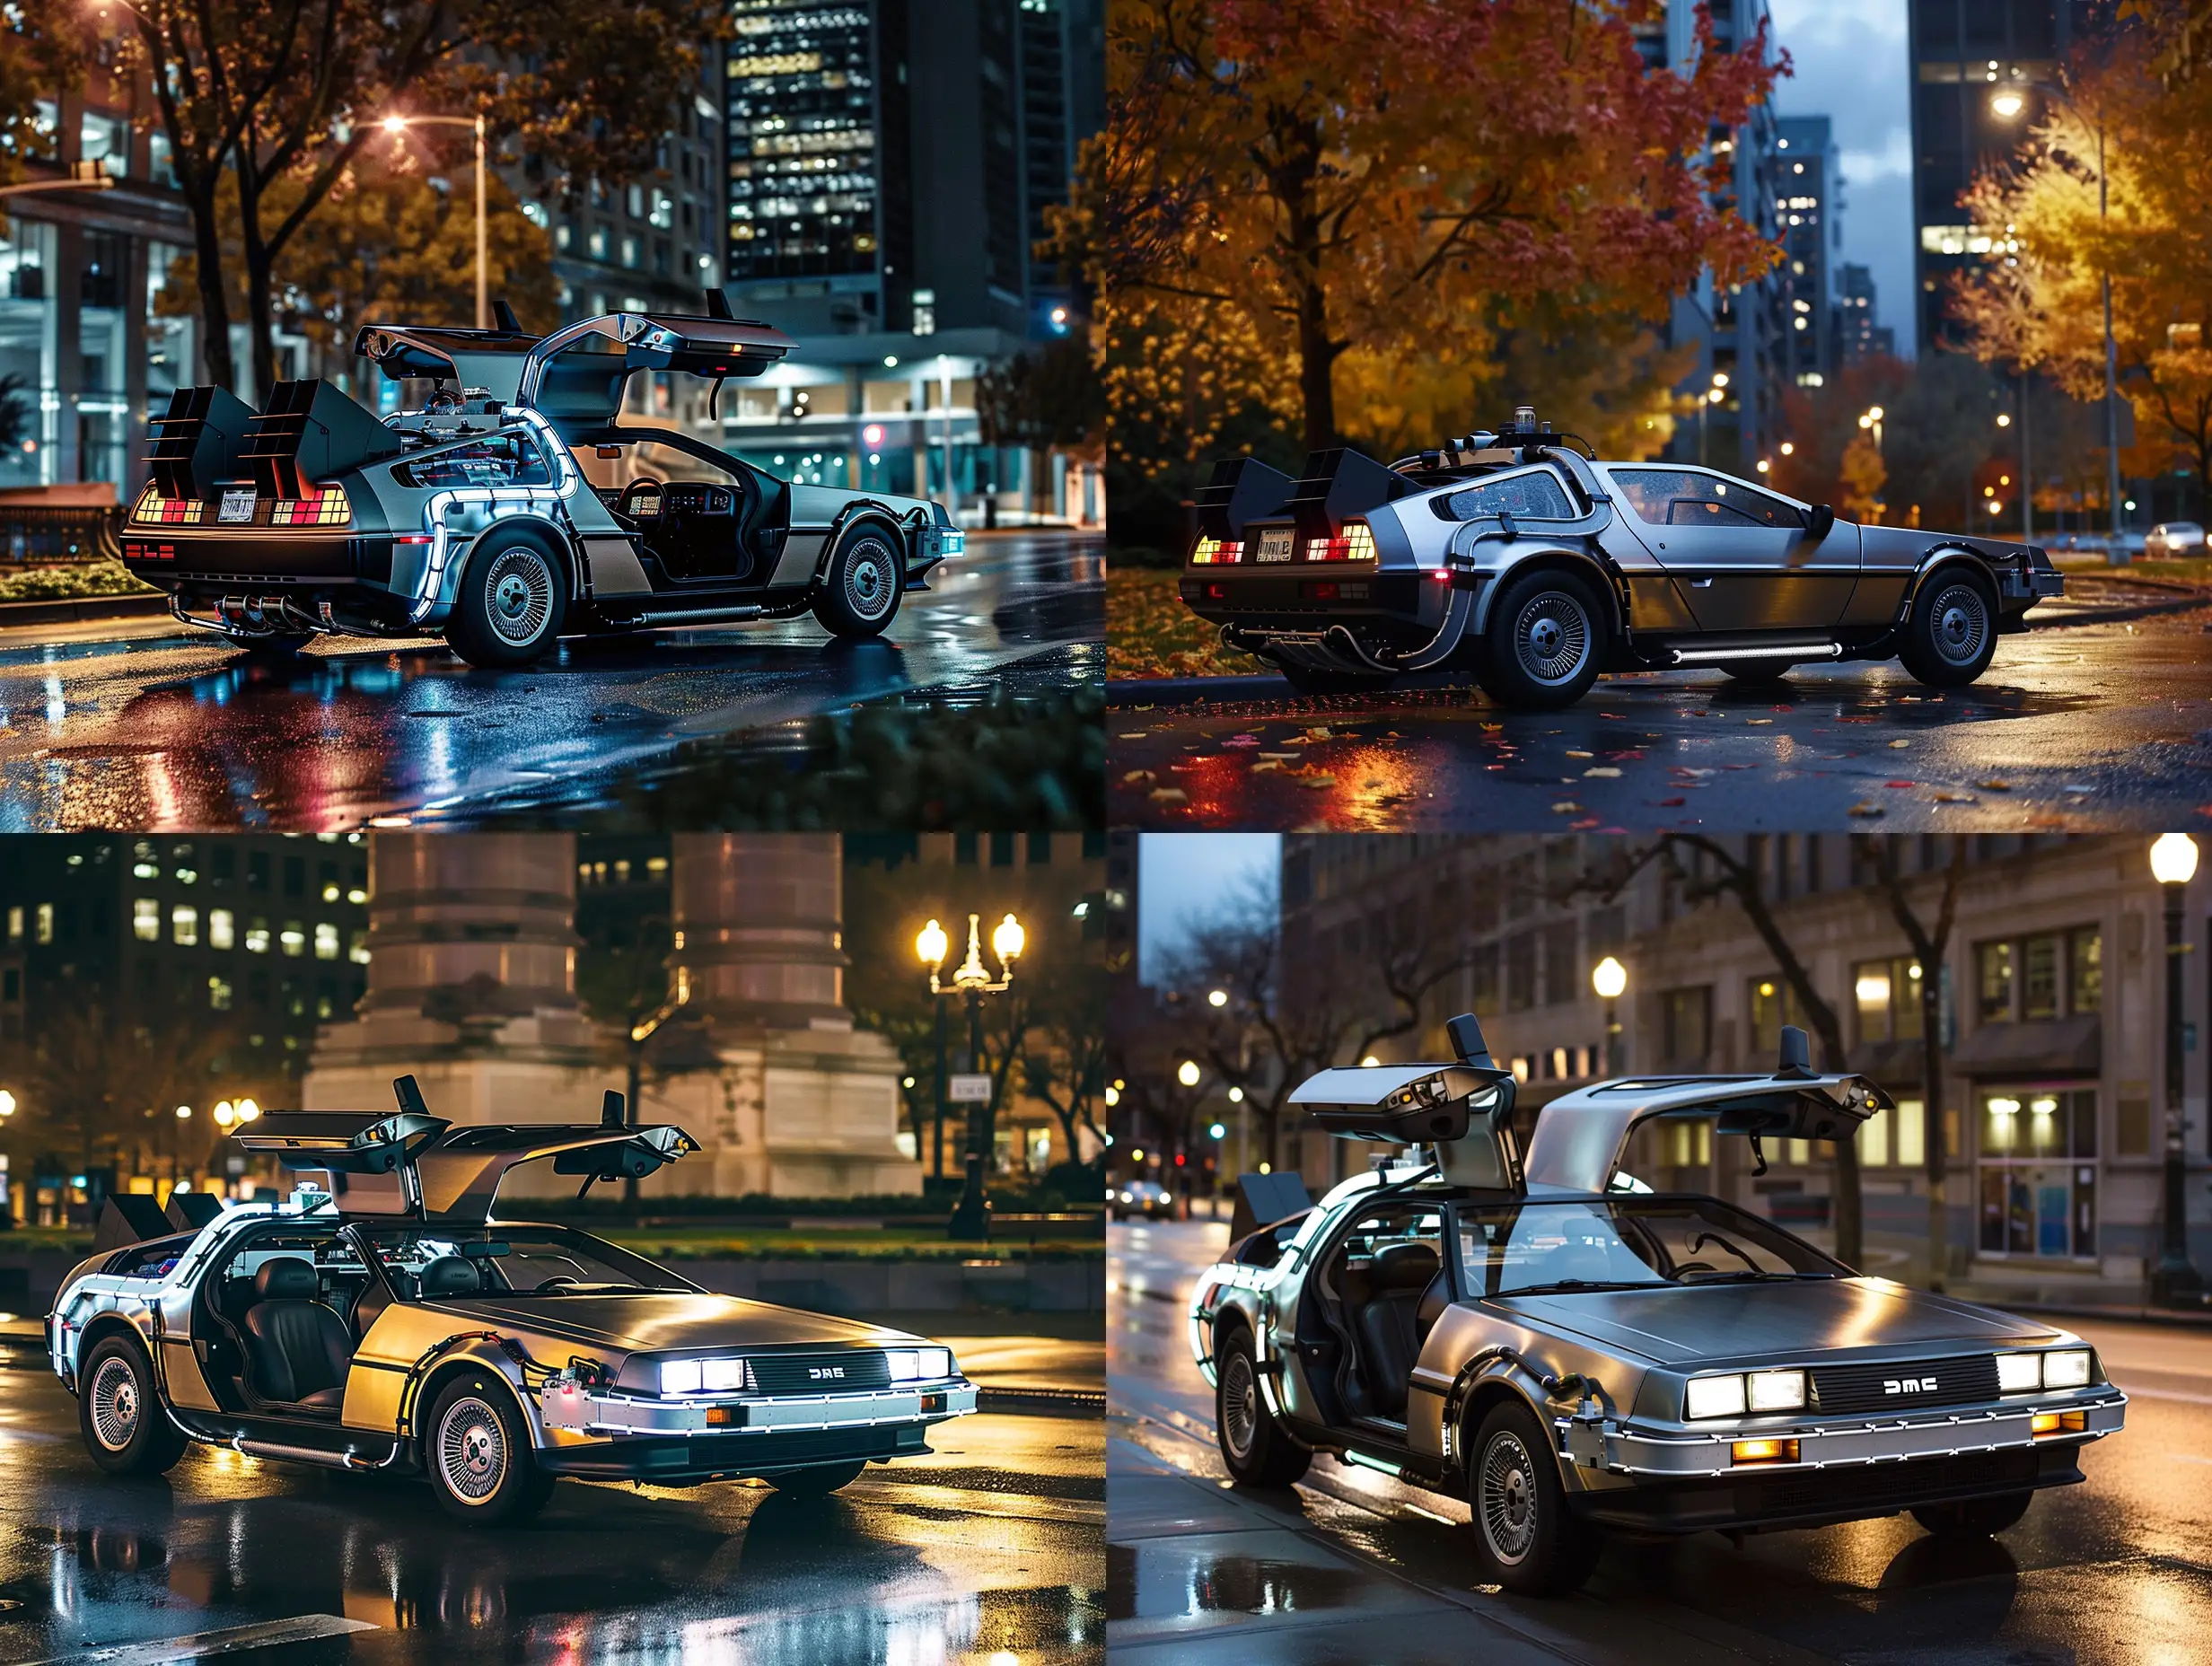 Back to the future delorean parked on wet city street at night